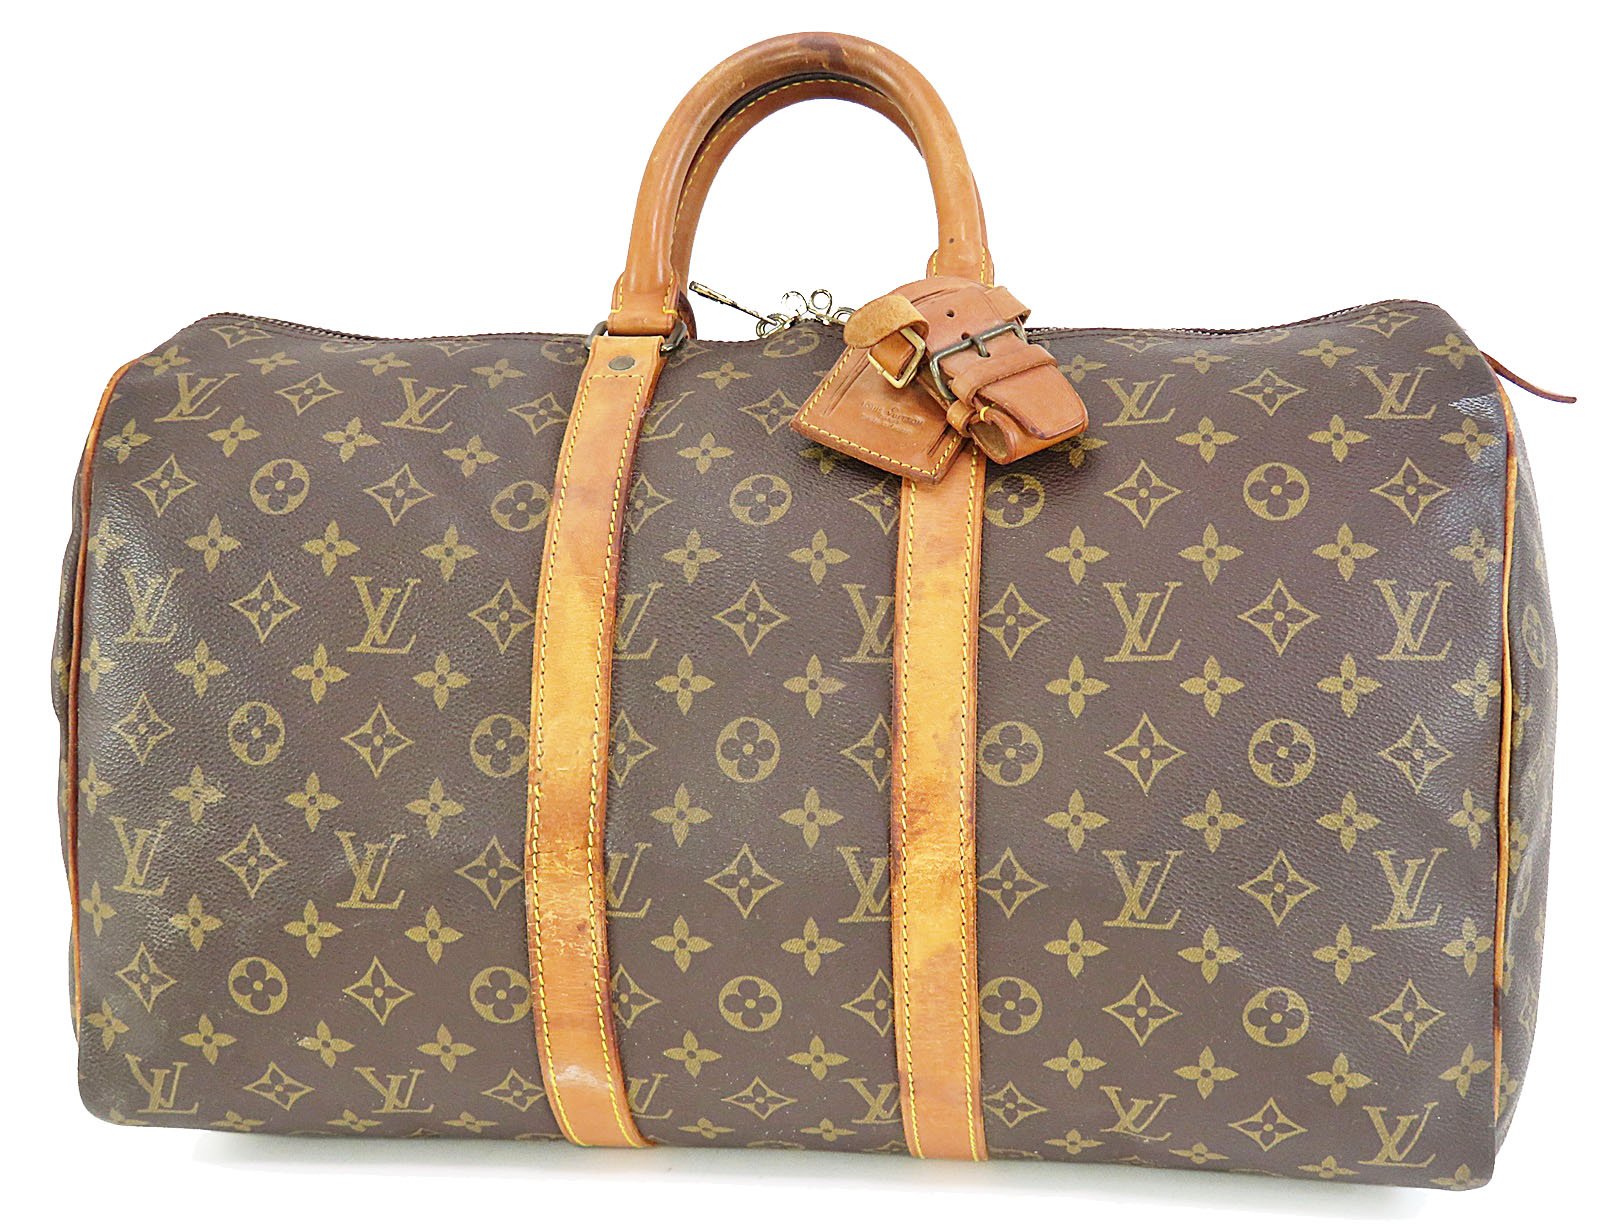 Louis Vuitton Superb Keepall 45 cm in Monogram canvas and